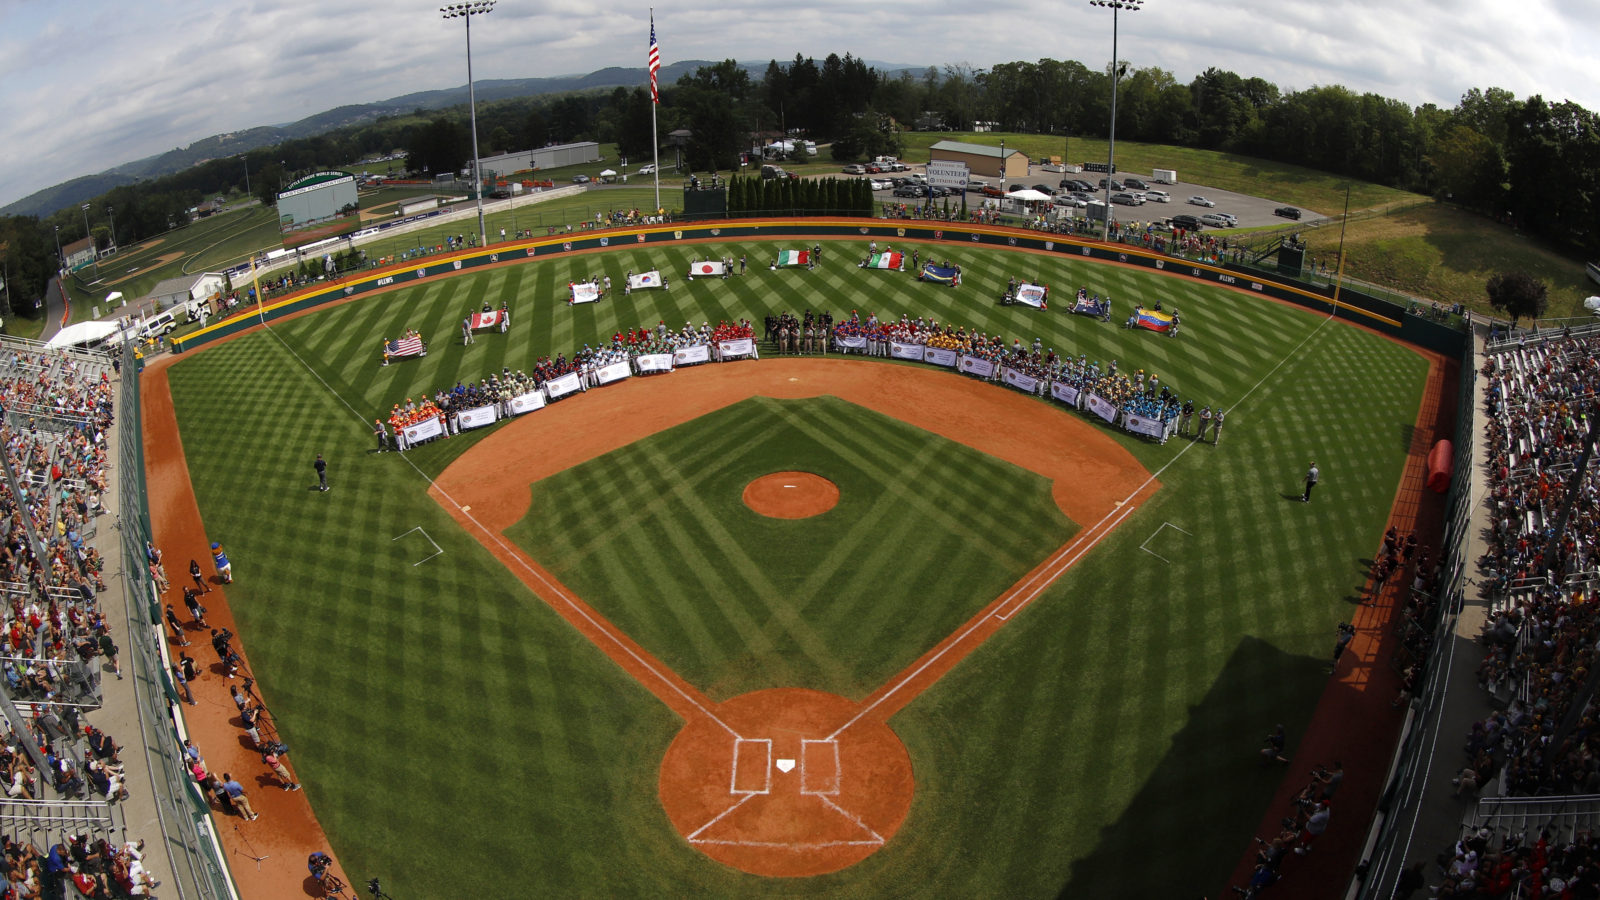 The 16 Little League Regional Champions ring the infield of Volunteer Stadium during the opening ceremony of the 2019 Little League World Series tournament in South Williamsport, Pa.,Thursday, Aug. 15, 2019. (AP Photo/Gene J. Puskar)